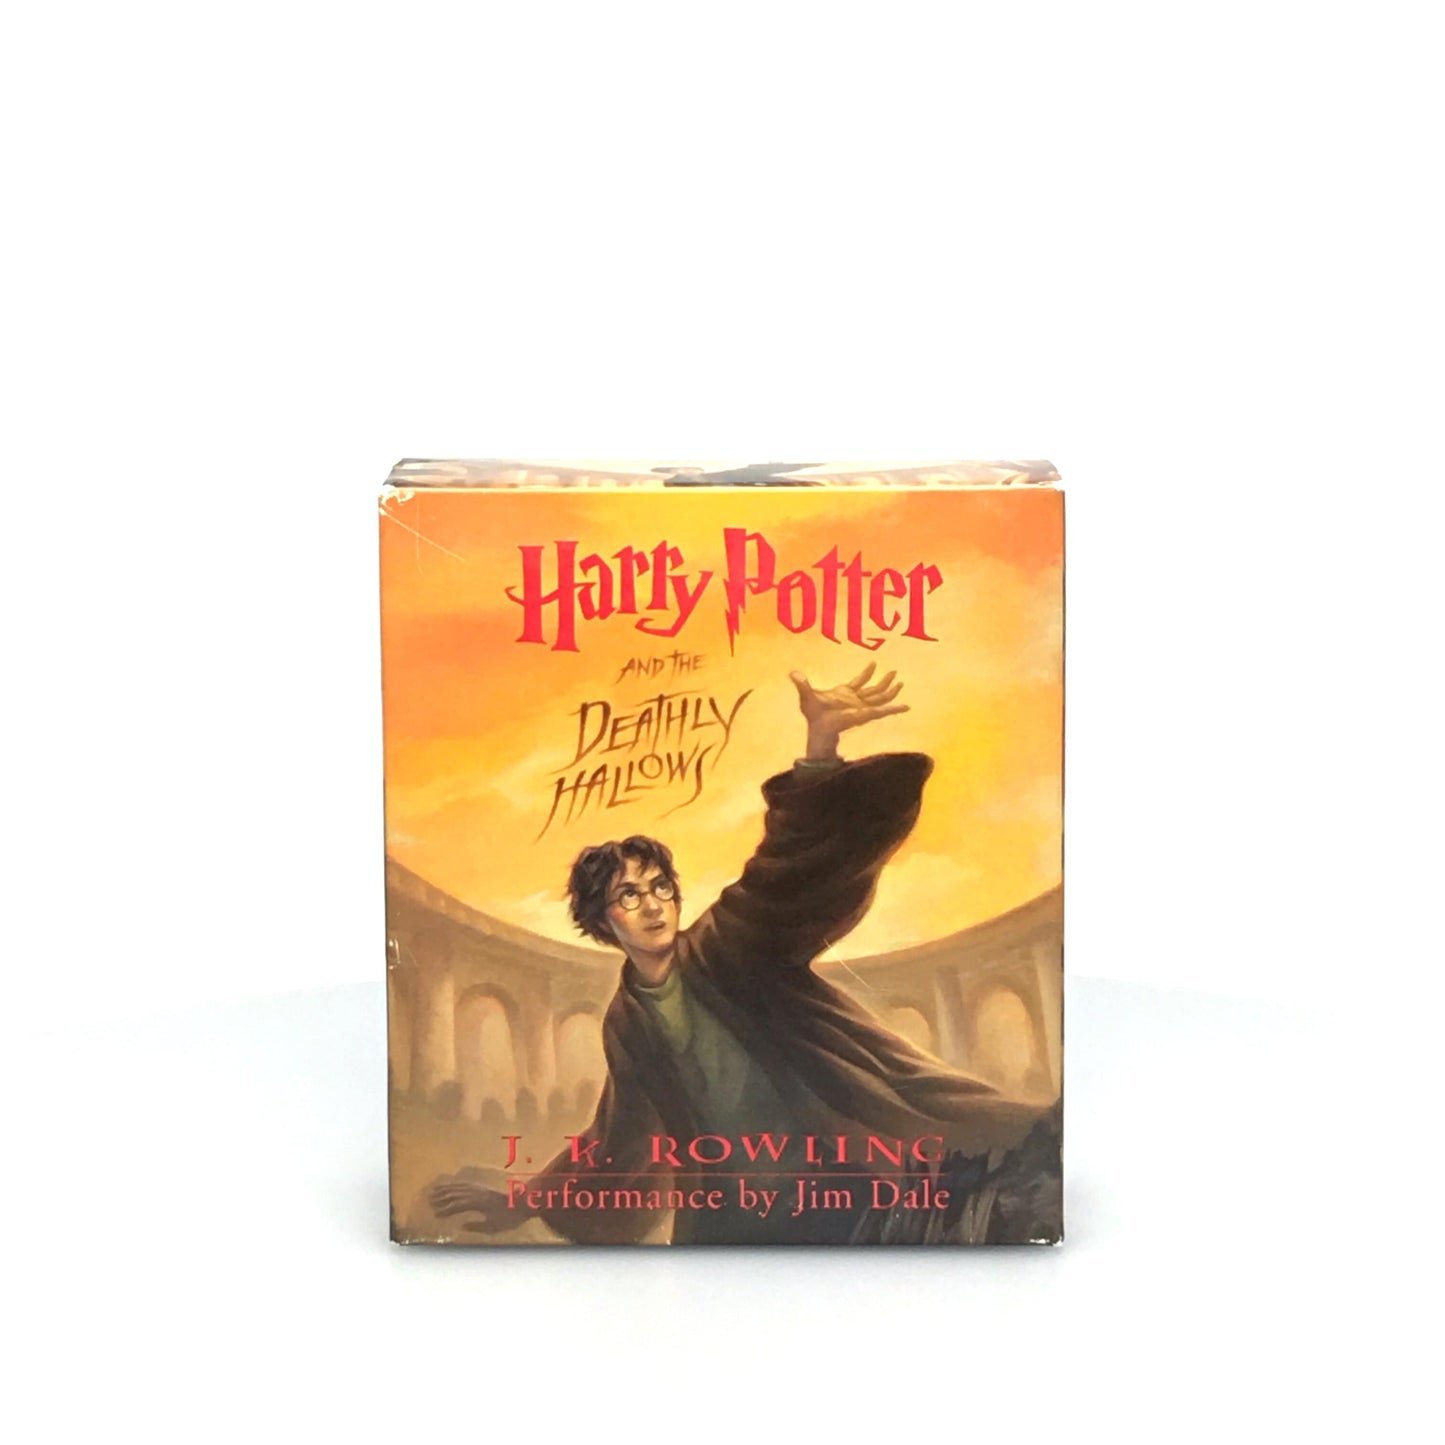 Harry Potter And The Deathly Hallows Hardback & Audio CD 17 Discs J. K. Rowling